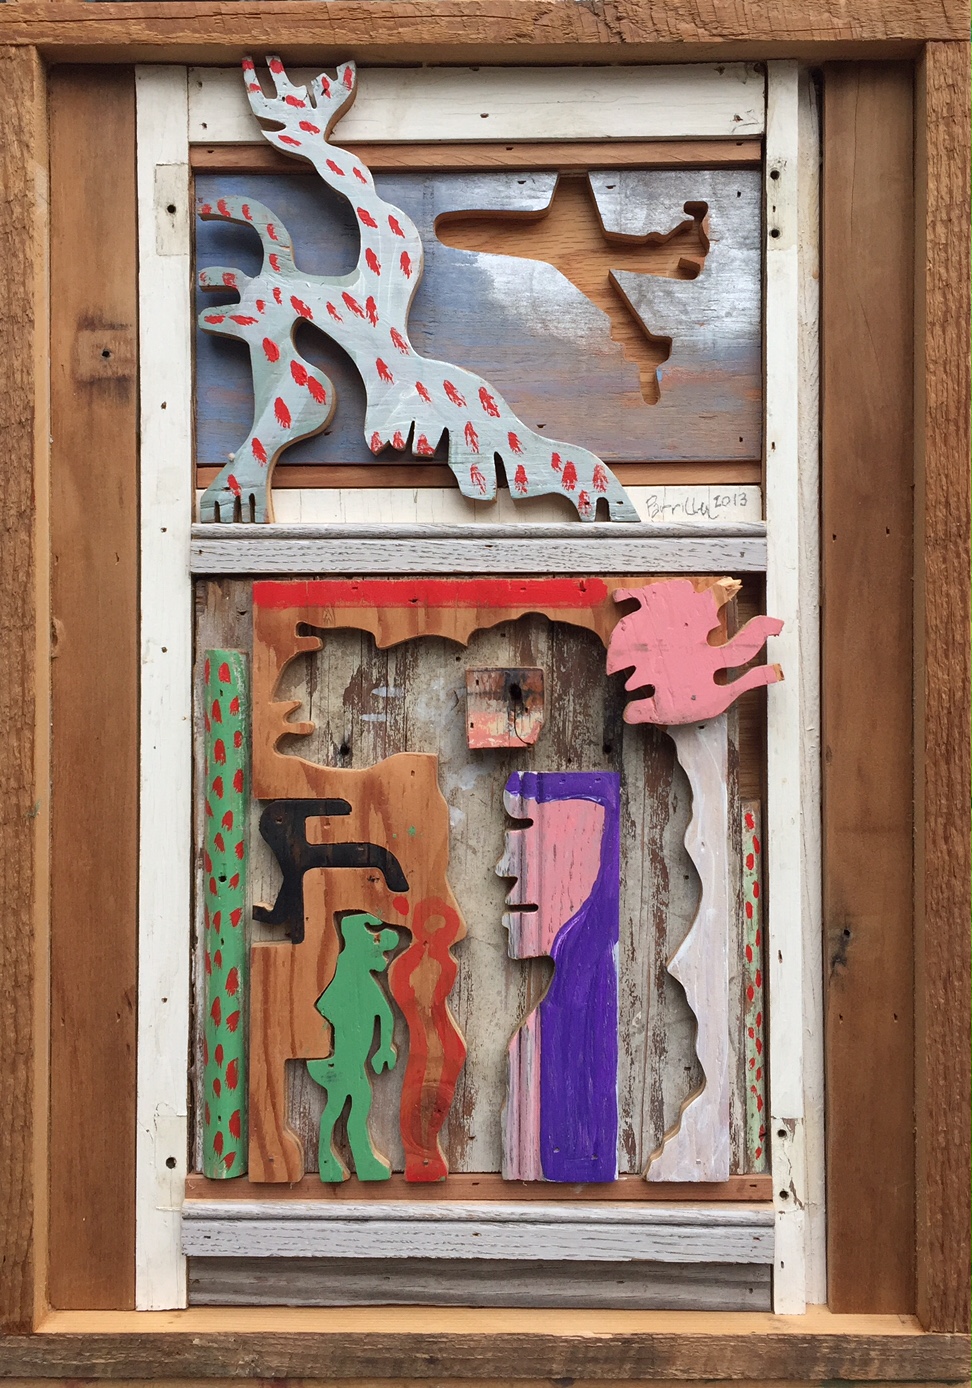 Third Drone Home, 2013, 22.5 X 16 inches, acrylic on wood relief and panel